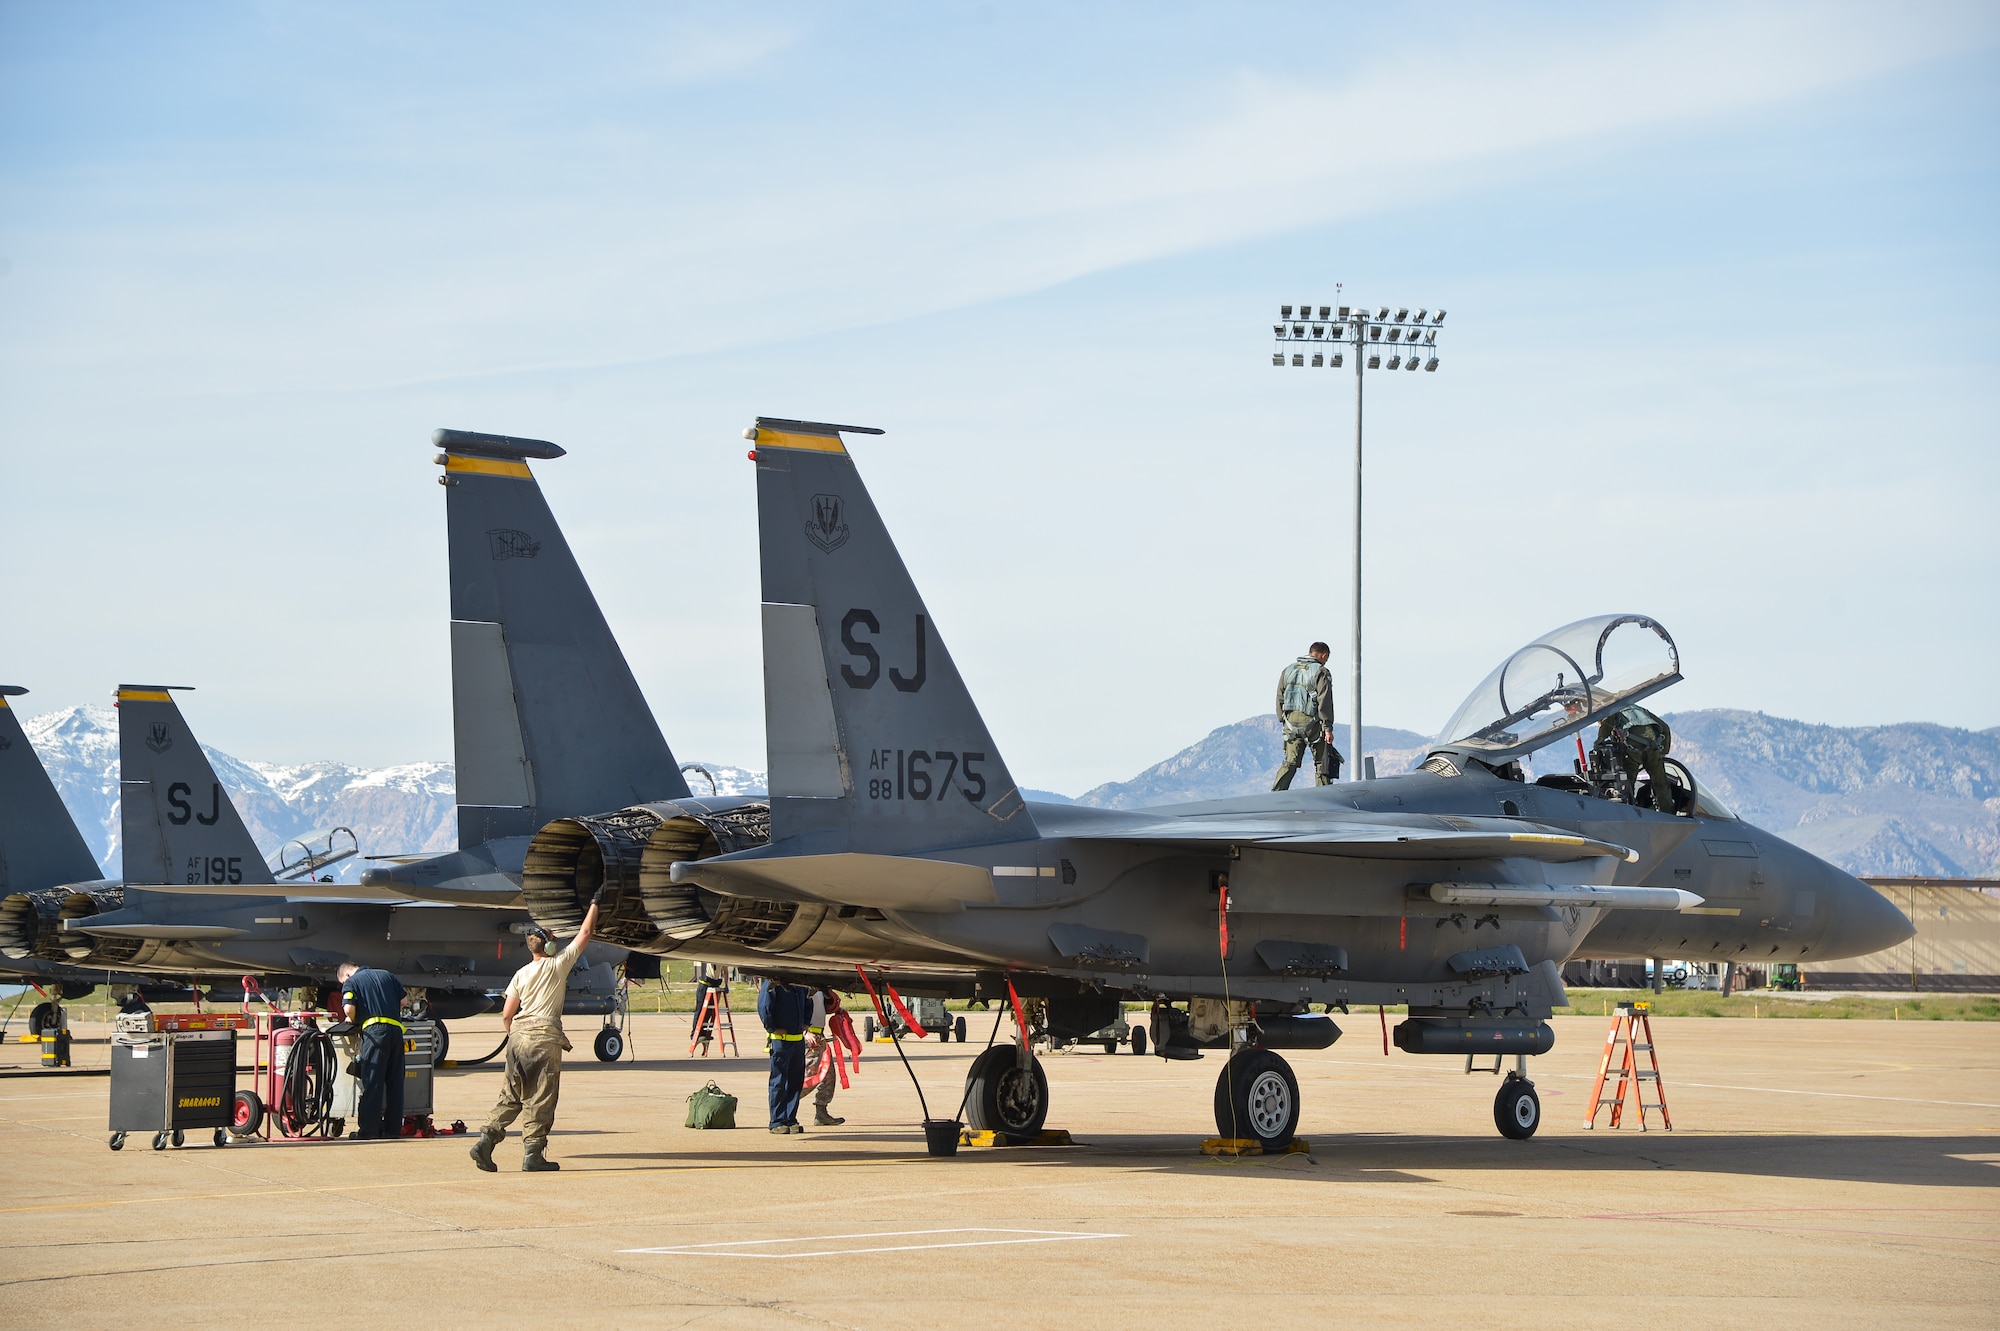 Airmen from the 4th Fighter Wing, Seymour Johnson Air Force Base, North Carolina, ready an F-15E Strike Eagle aircraft for flight, May 4, 2016, at Hill AFB, Utah. The F-15Es, along with other fighter and bomber aircraft, participated in the U.S. Air Force air-to-ground weapons evaluation known as Combat Hammer. (U.S. Air Force photo by R. Nial Bradshaw)